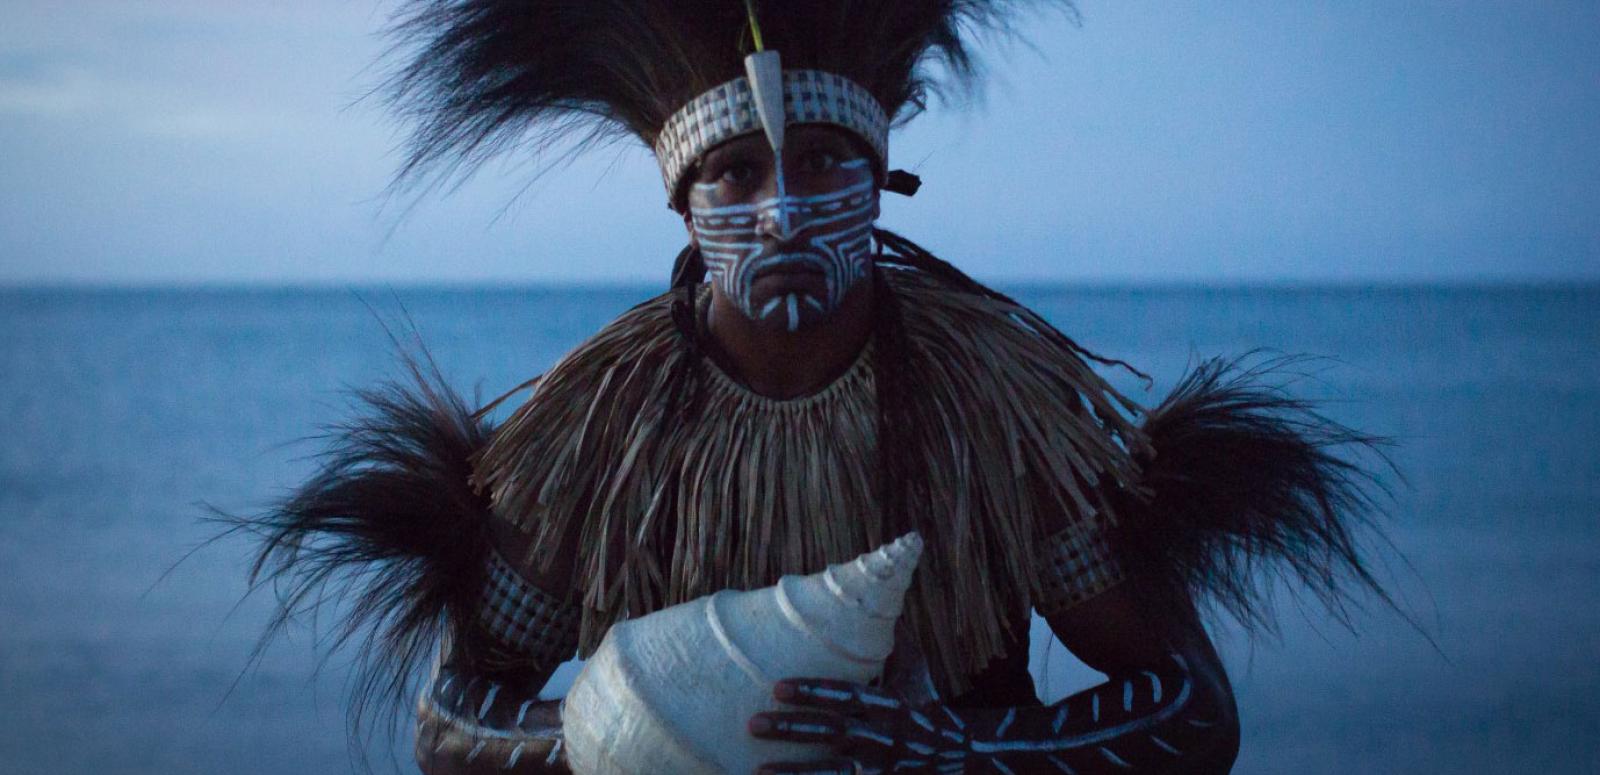 An indigenous man in traditional feathered costume holding a large shell with the ocean in the background.